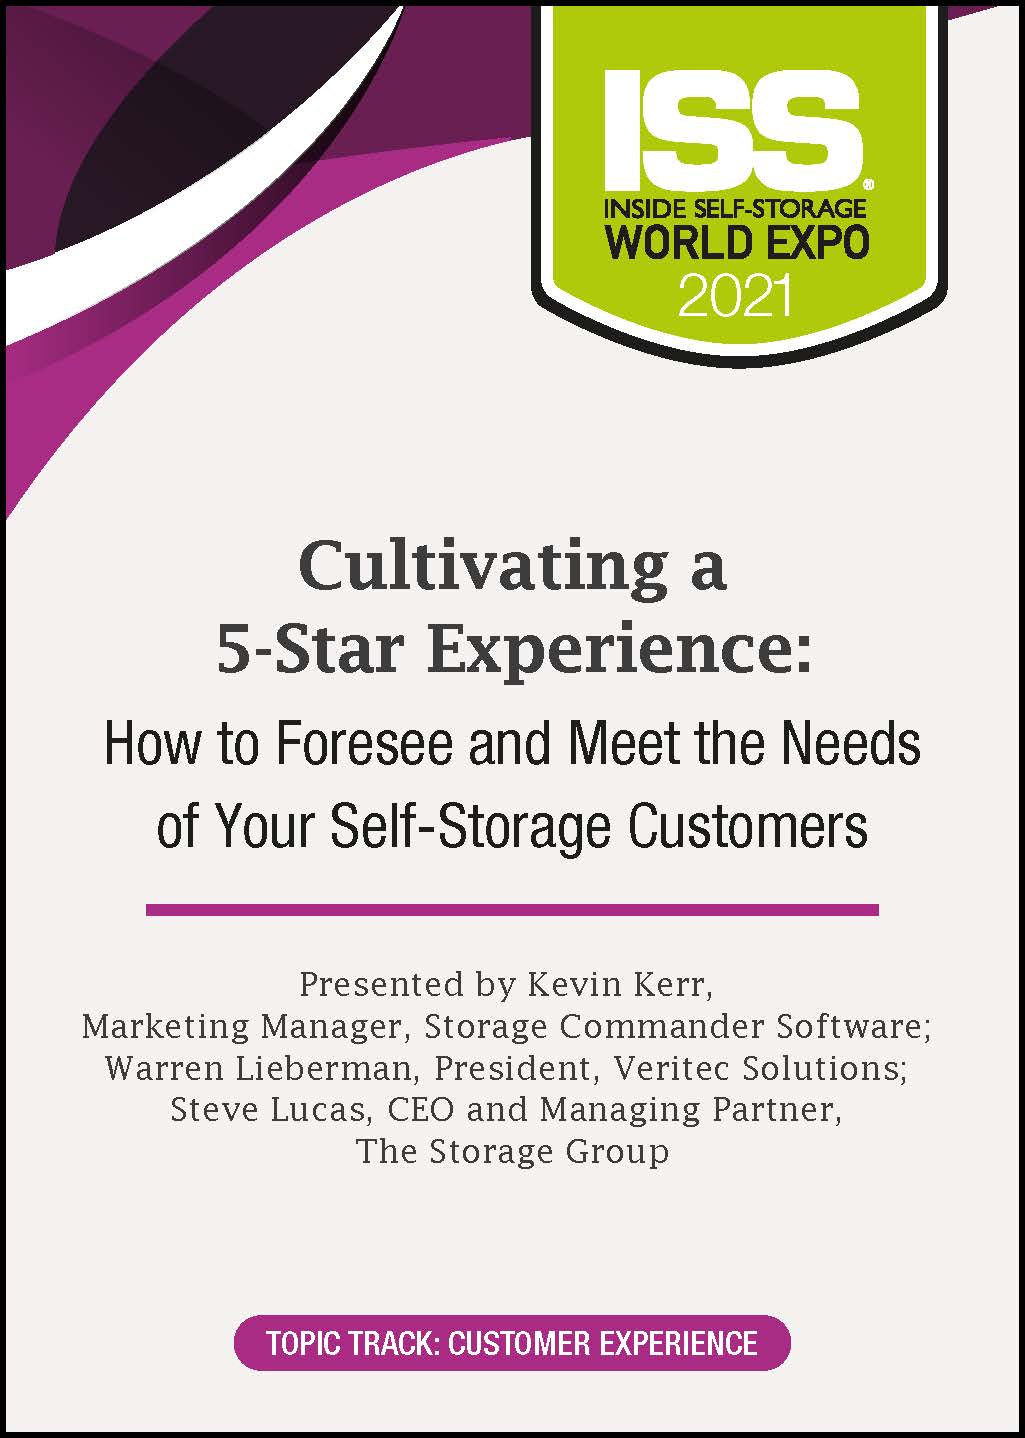 Cultivating a 5-Star Experience: How to Foresee and Meet the Needs of Your Self-Storage Customers